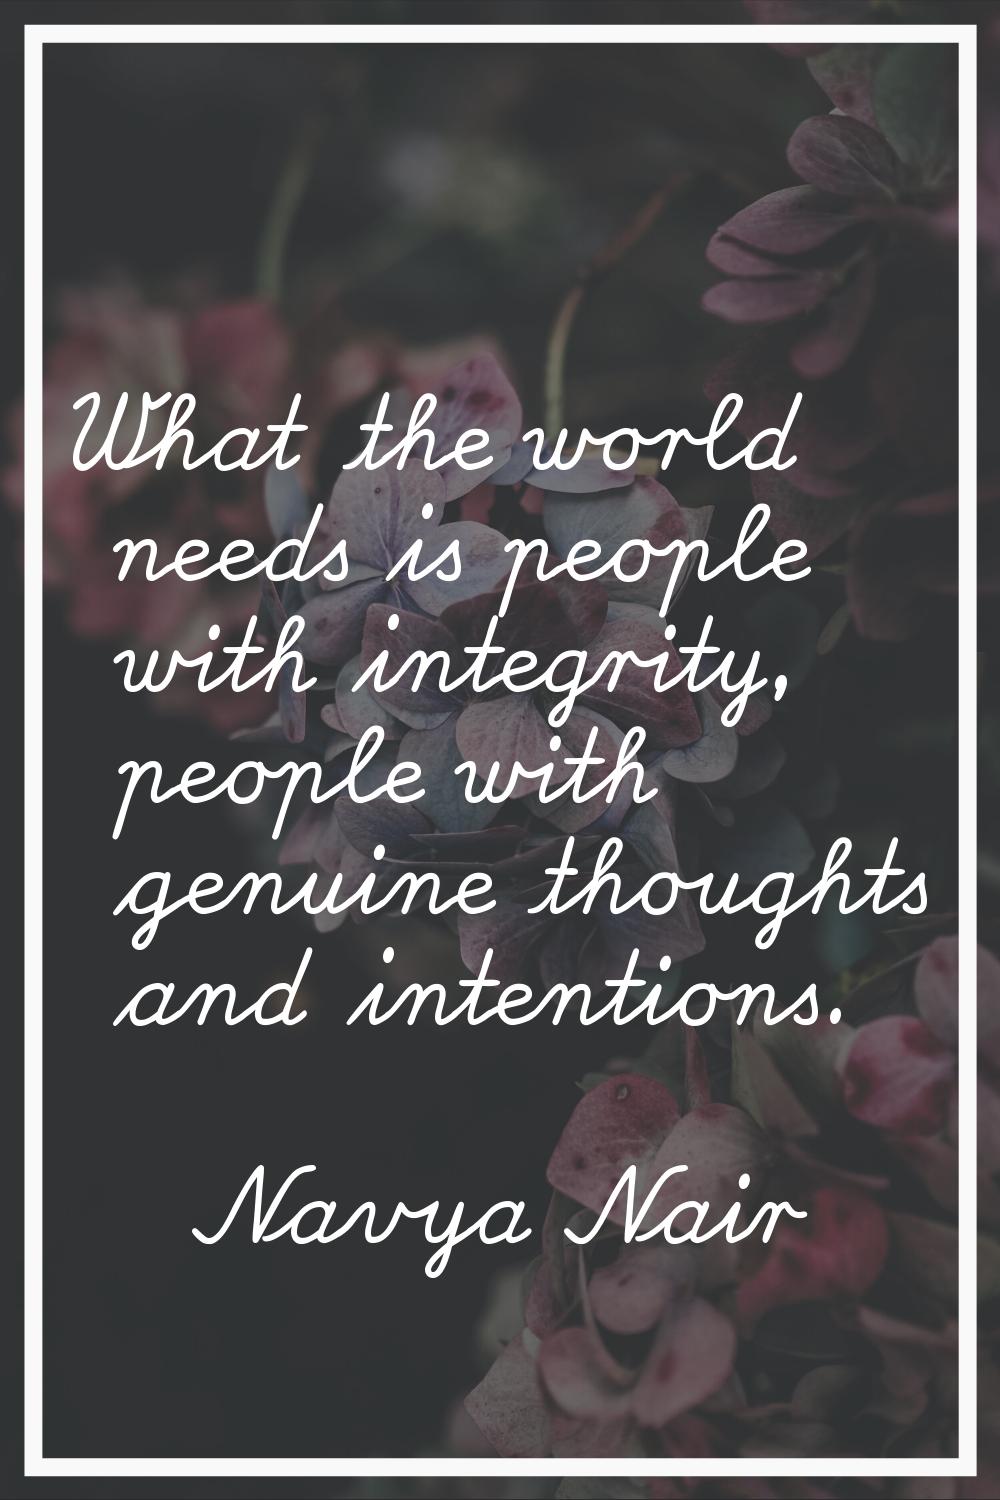 What the world needs is people with integrity, people with genuine thoughts and intentions.